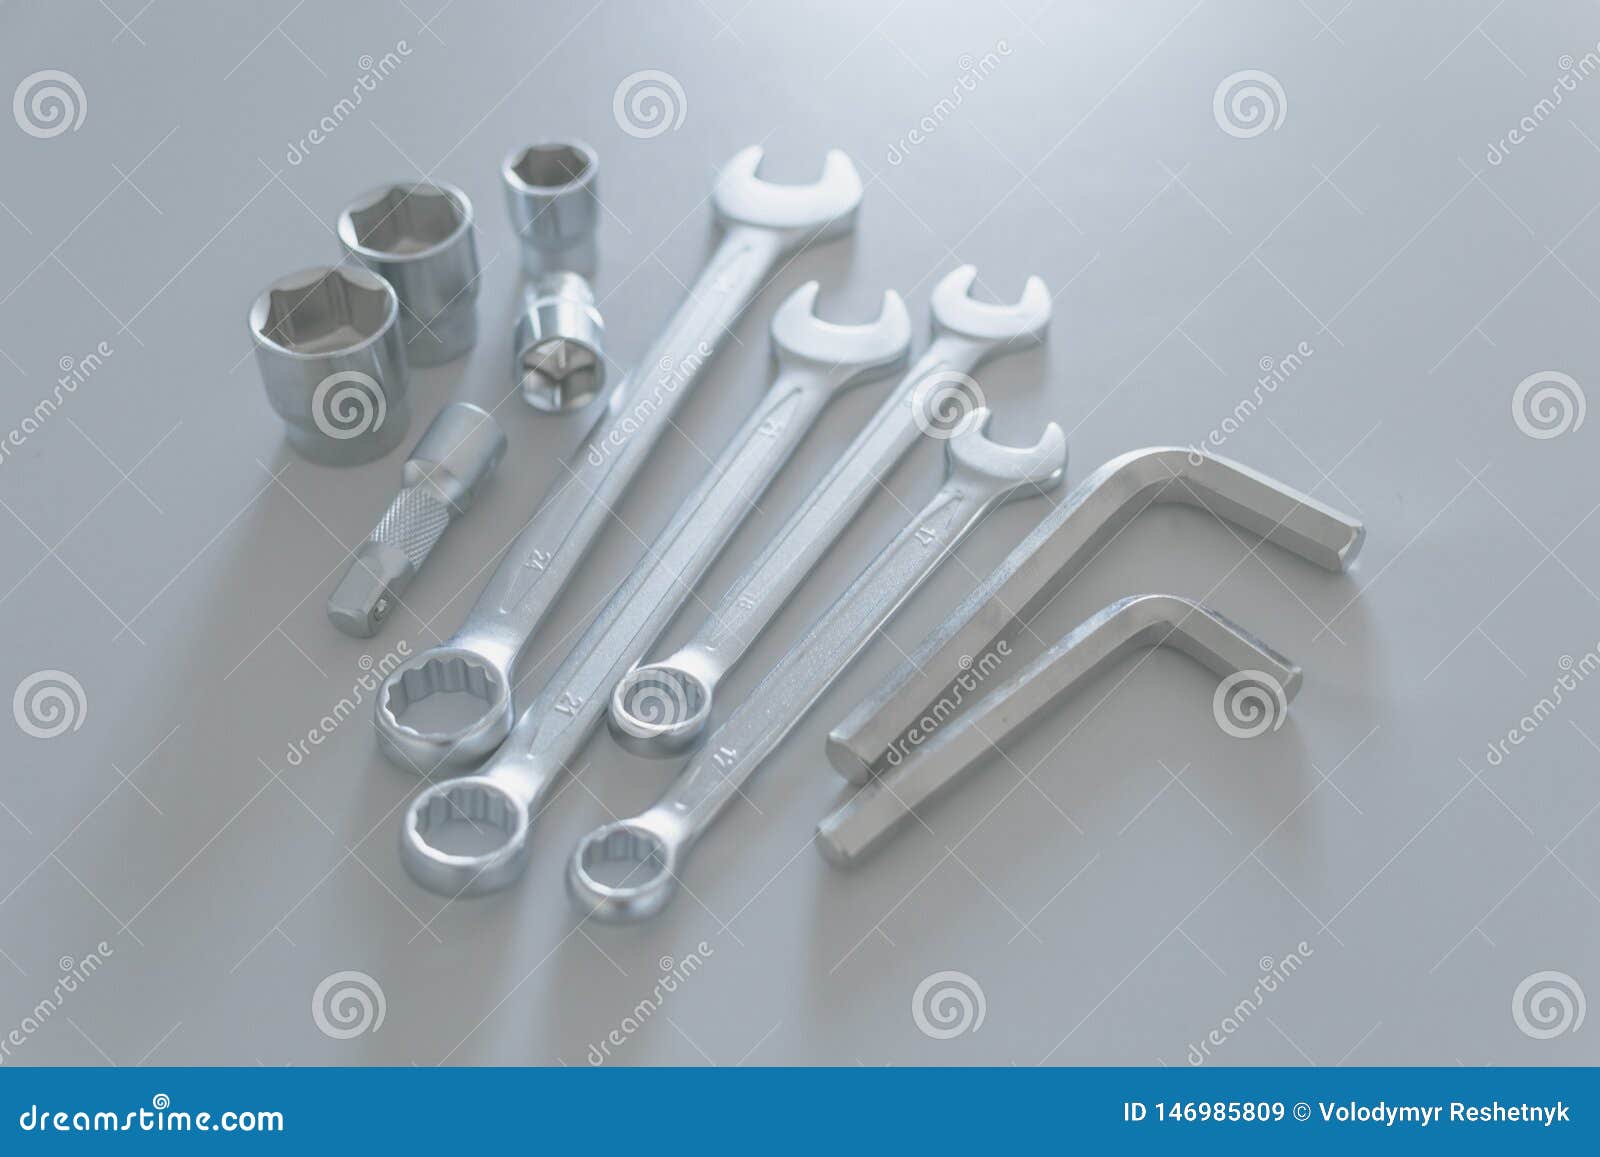 Industrial-grade Pneumatic Perforated Ratchet Wrench Auto Repair Pneumatic Tools Hexagon size : 14mm Perforated Hexagon Socket Wrench 